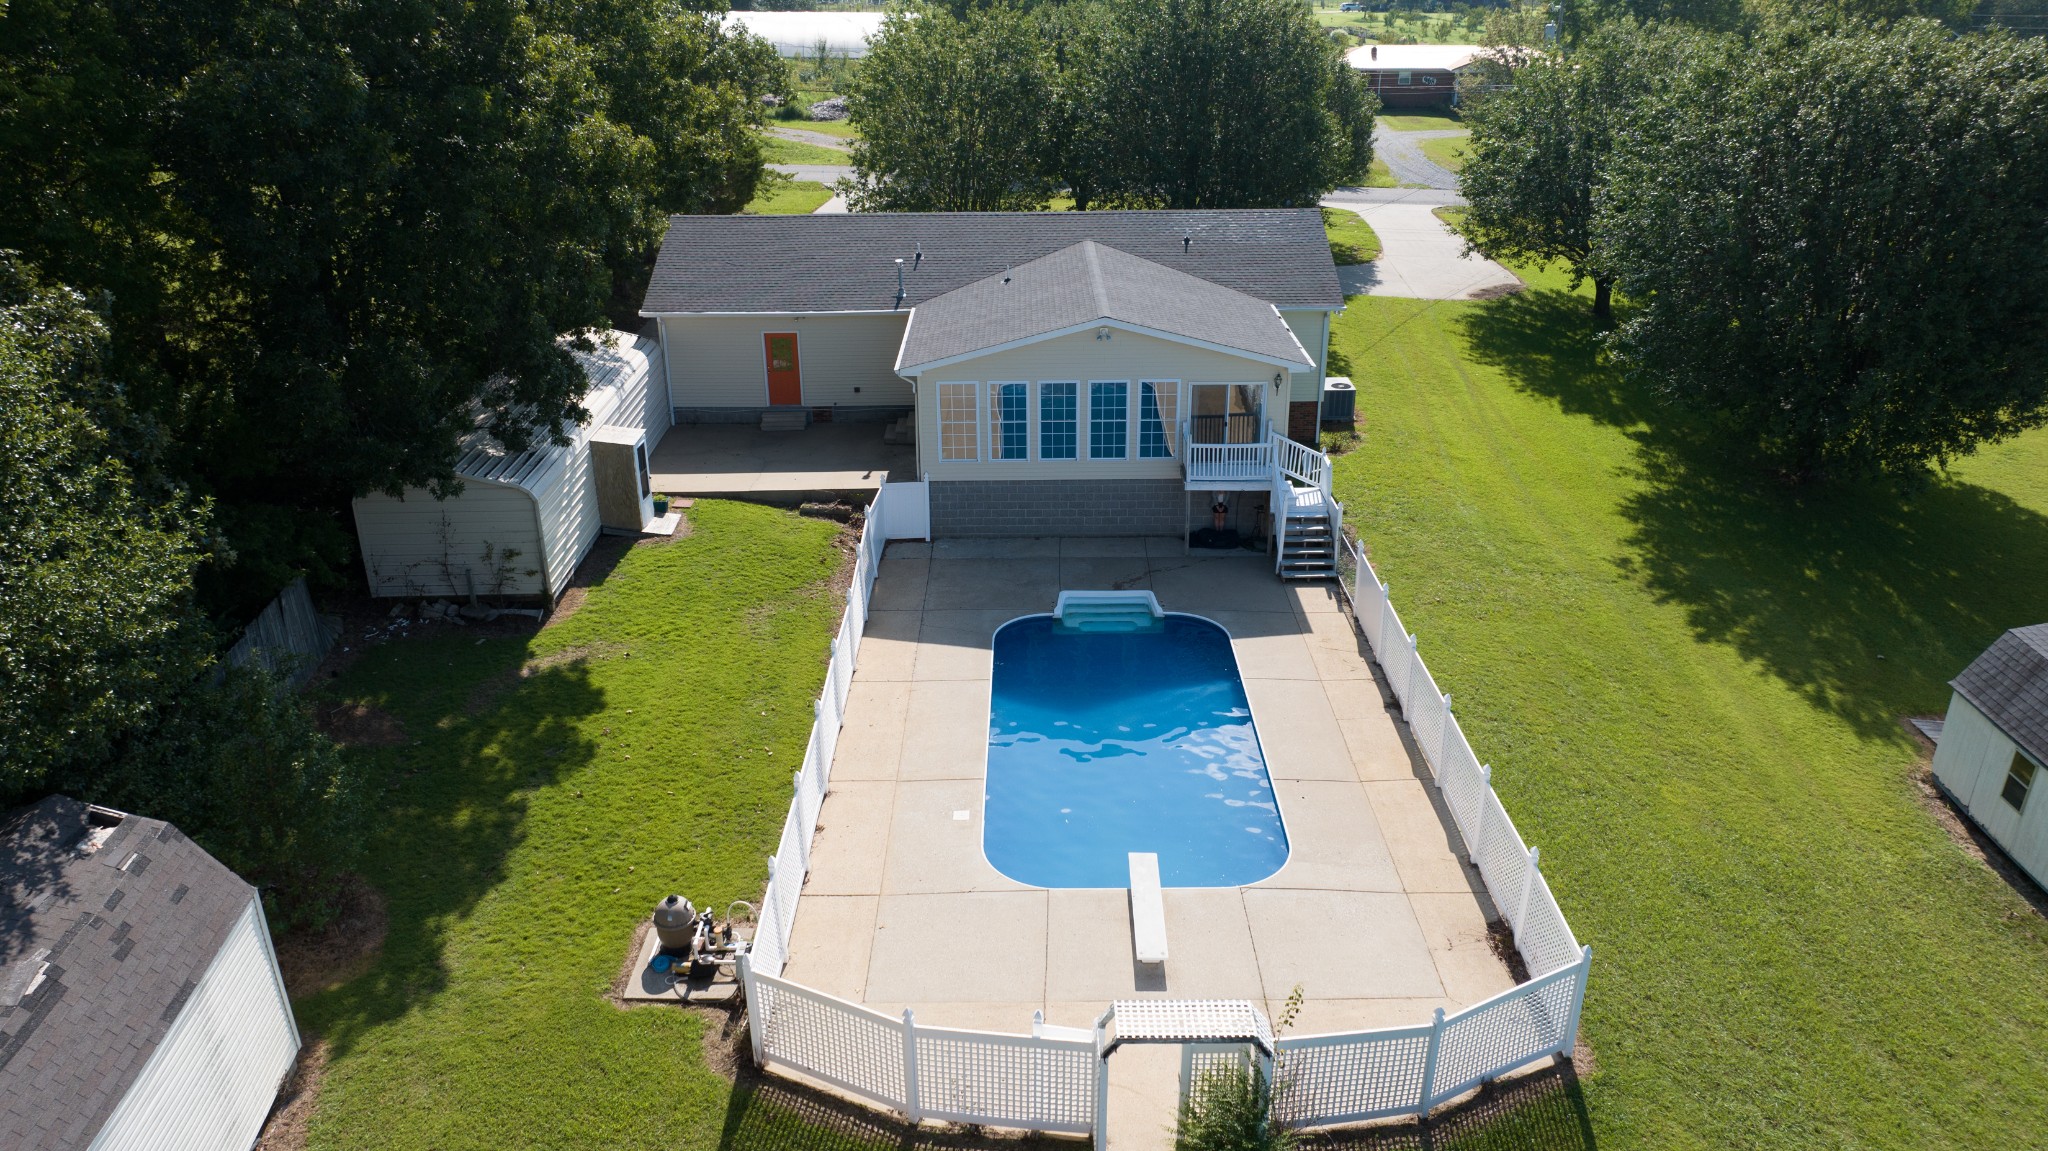 a aerial view of a house with swimming pool garden and patio